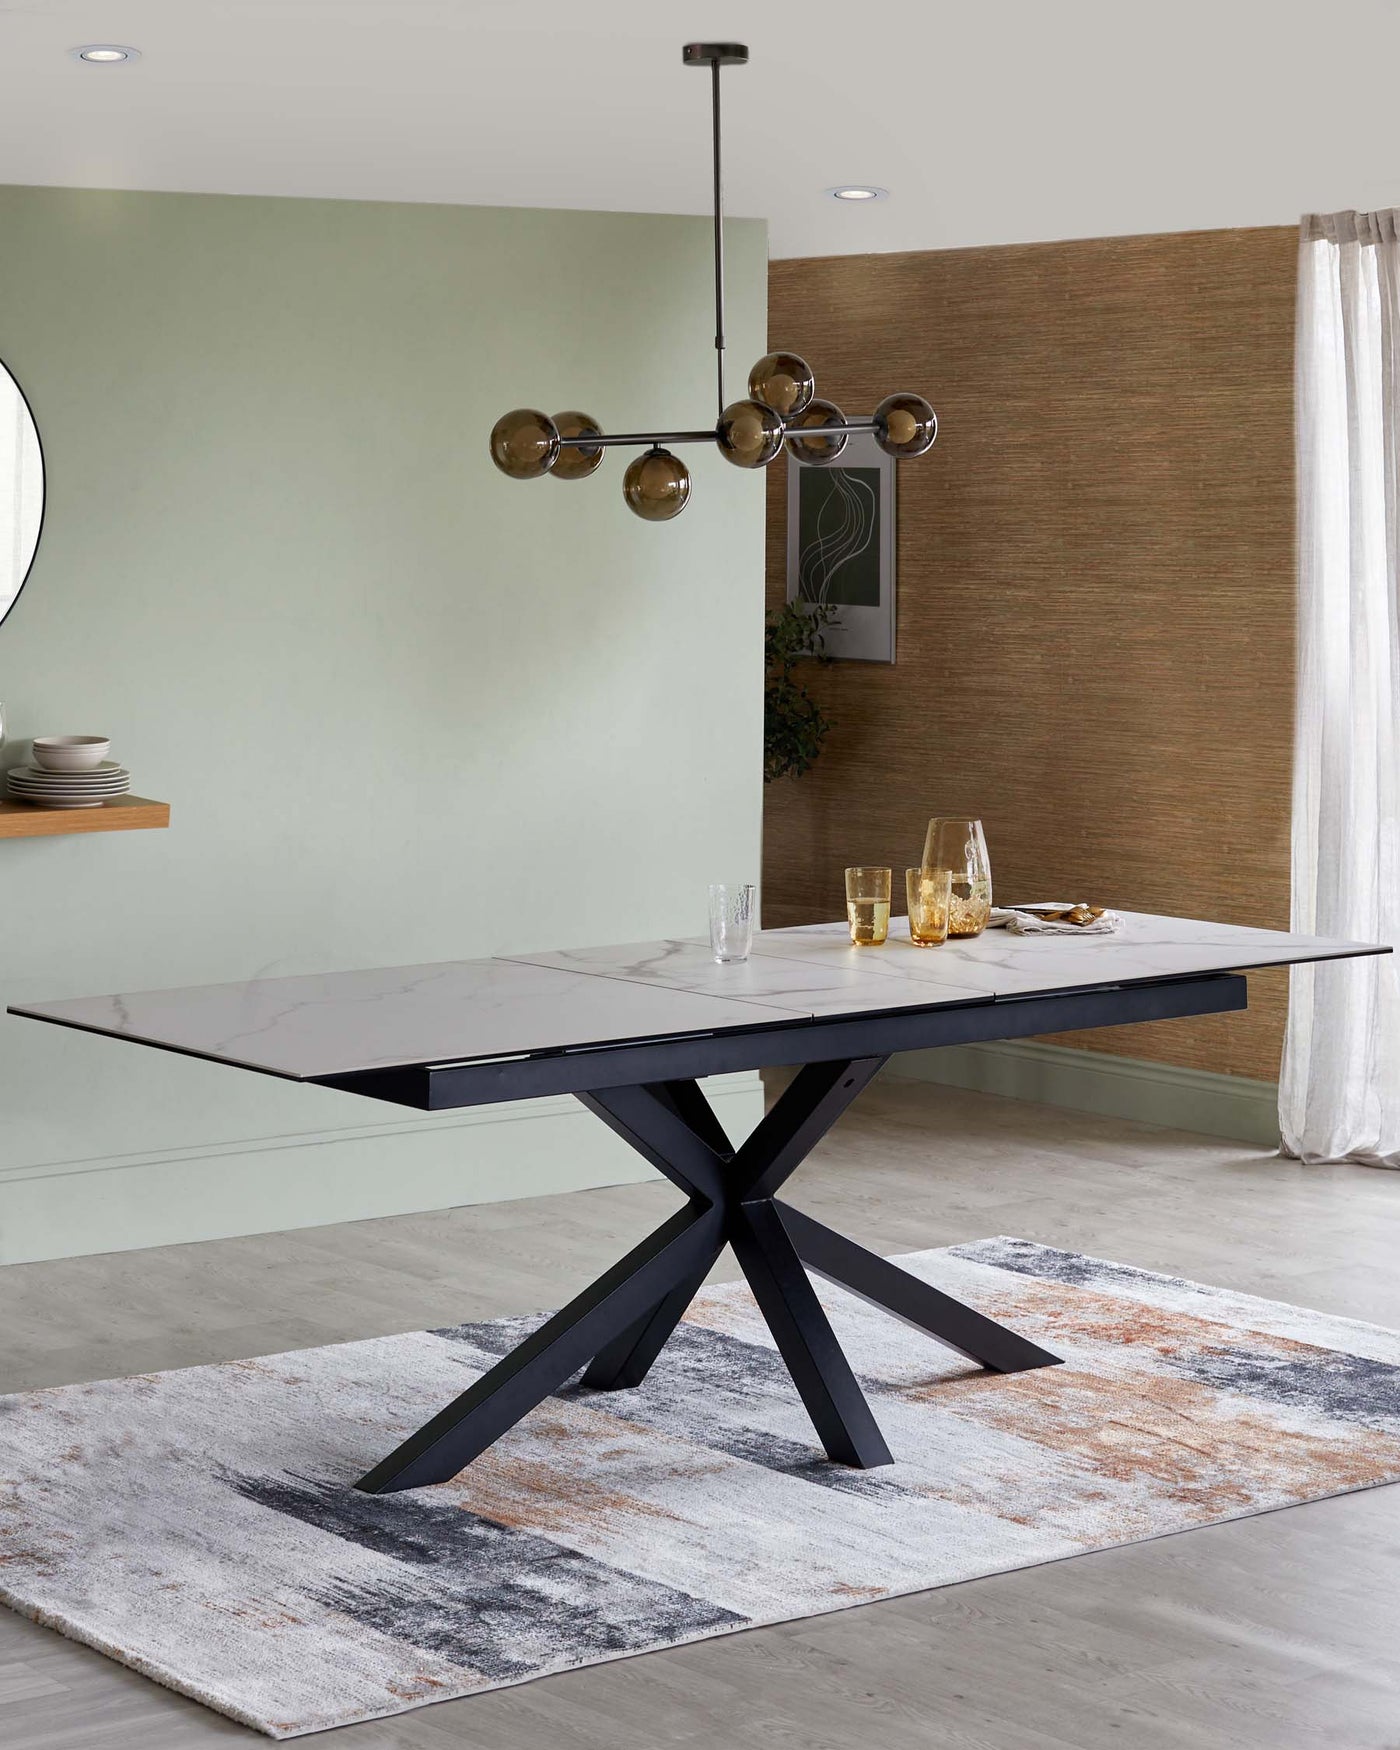 Modern rectangular dining table with a marble top and a bold, black cross-legged base, displayed on a textured area rug with abstract design in shades of white, grey, and burnt orange.